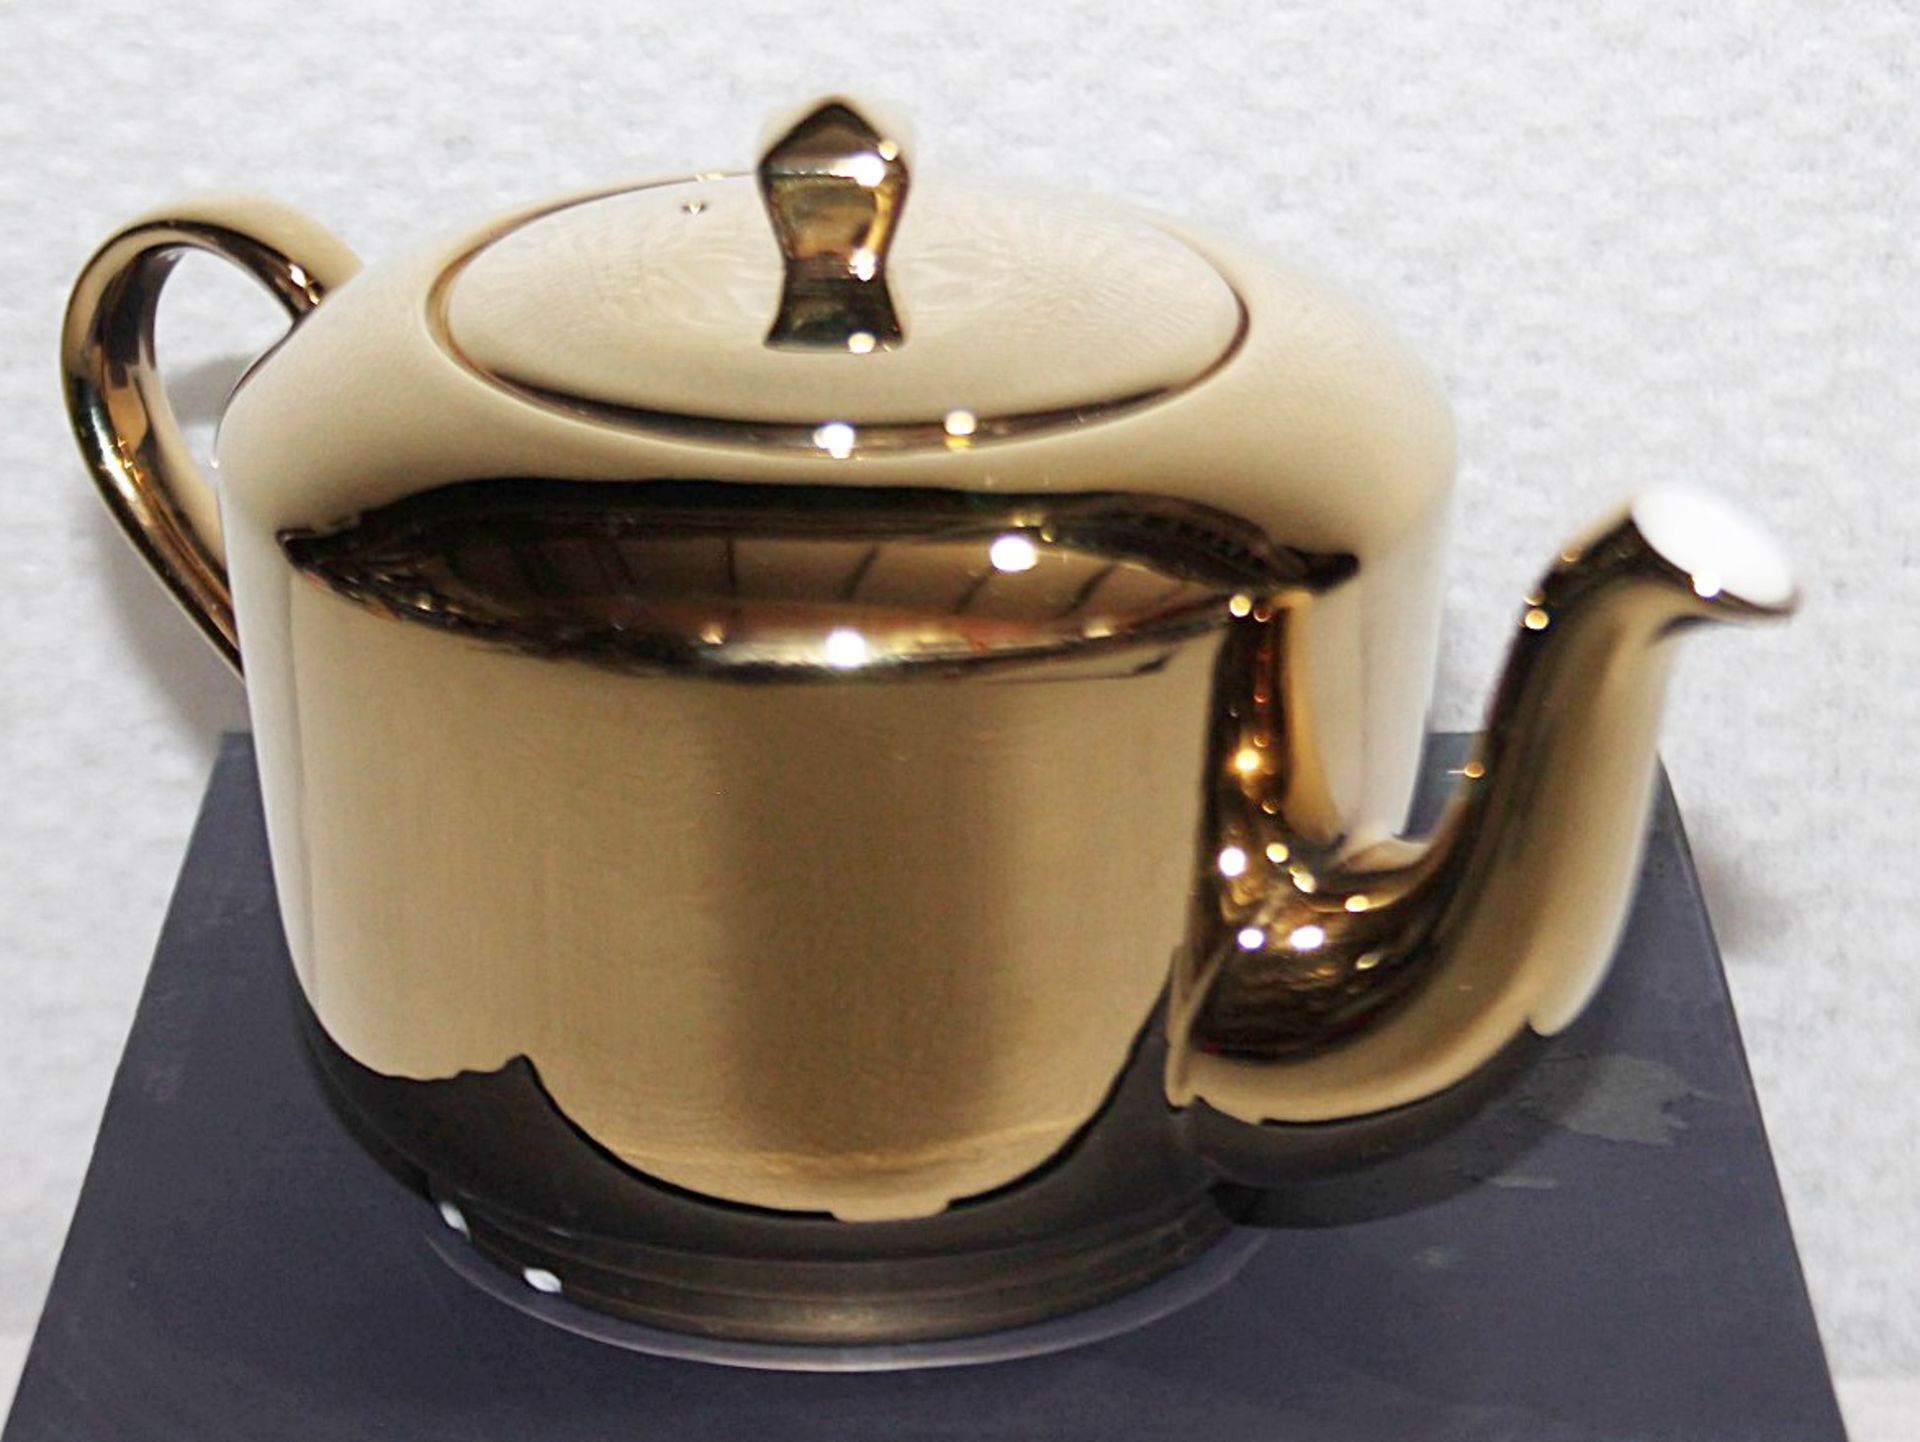 1 x RICHARD BRENDON 'Reflect' Fine Bone China Teapot In Gold - Original Price £250.00 *See Condition - Image 8 of 9